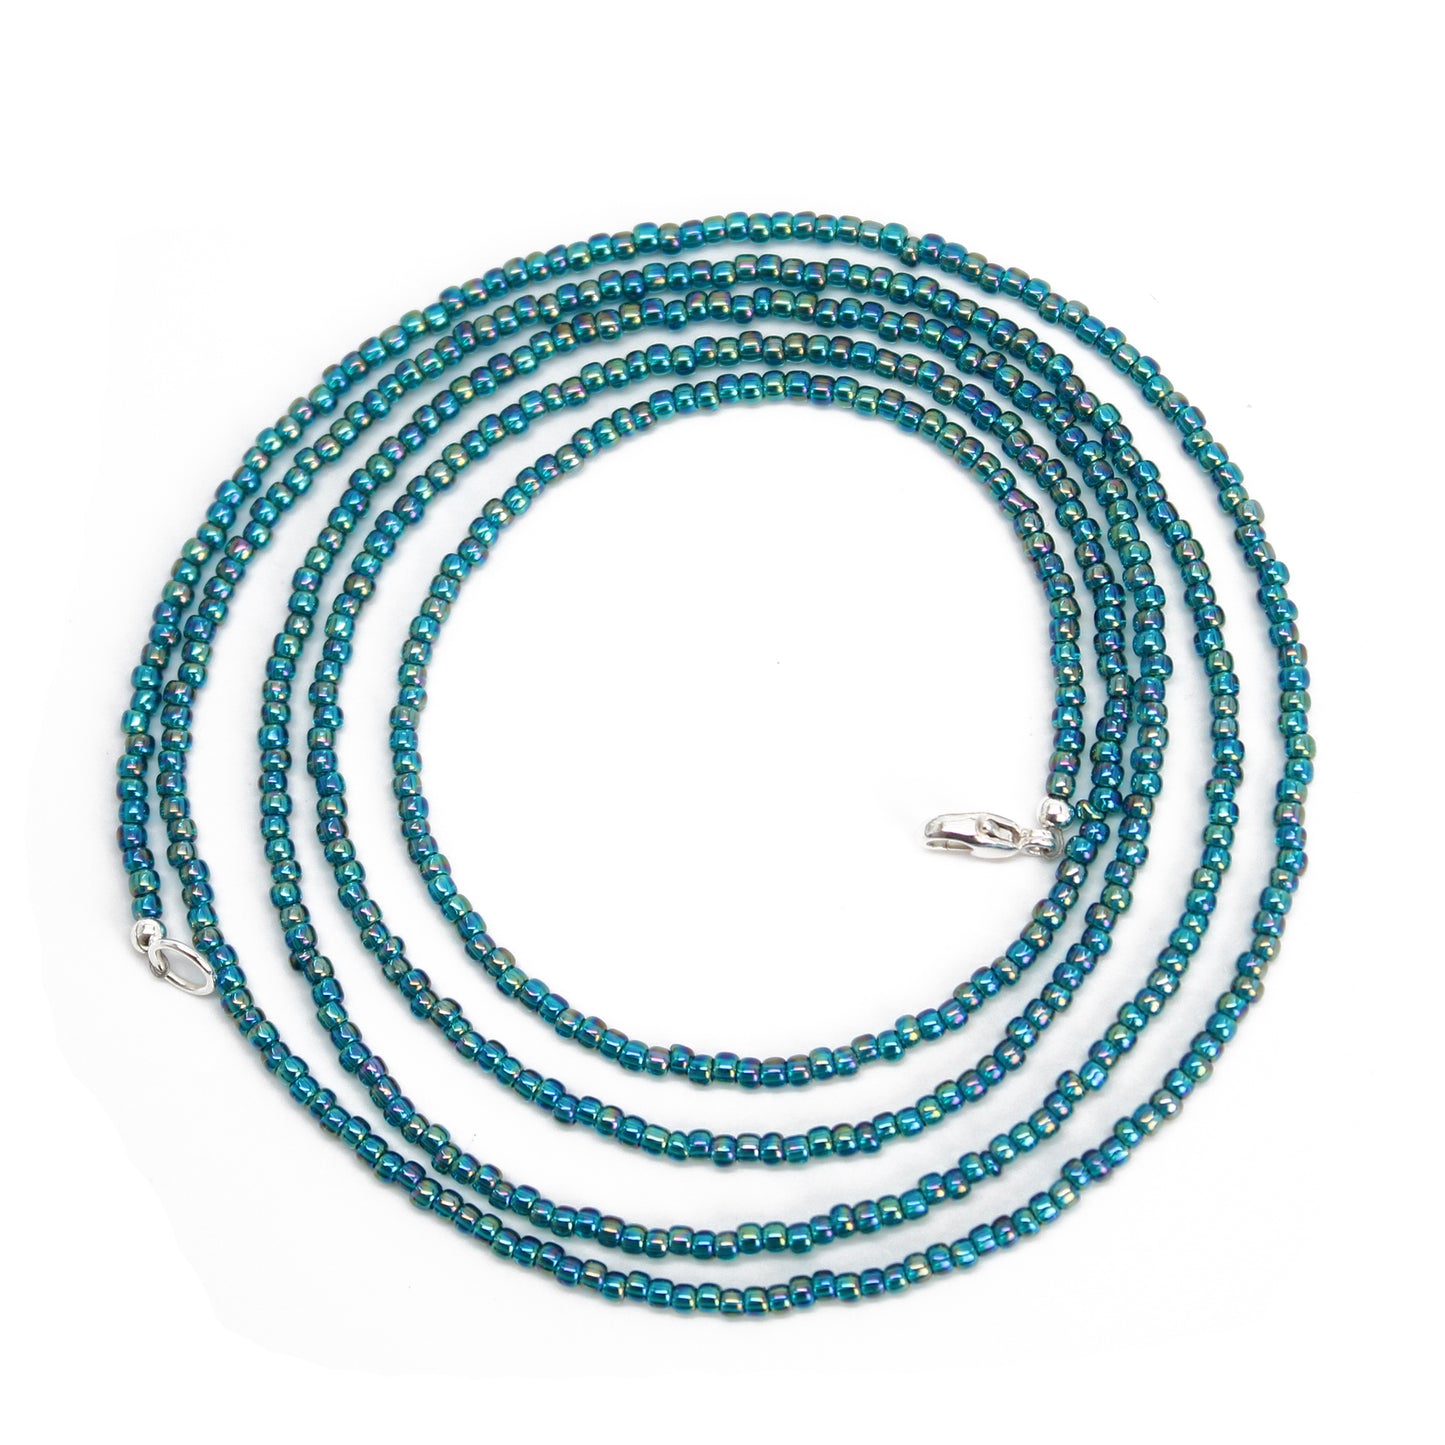 Transparent Rainbow Teal Seed Bead Necklace, Thin 1.5mm Single Strand